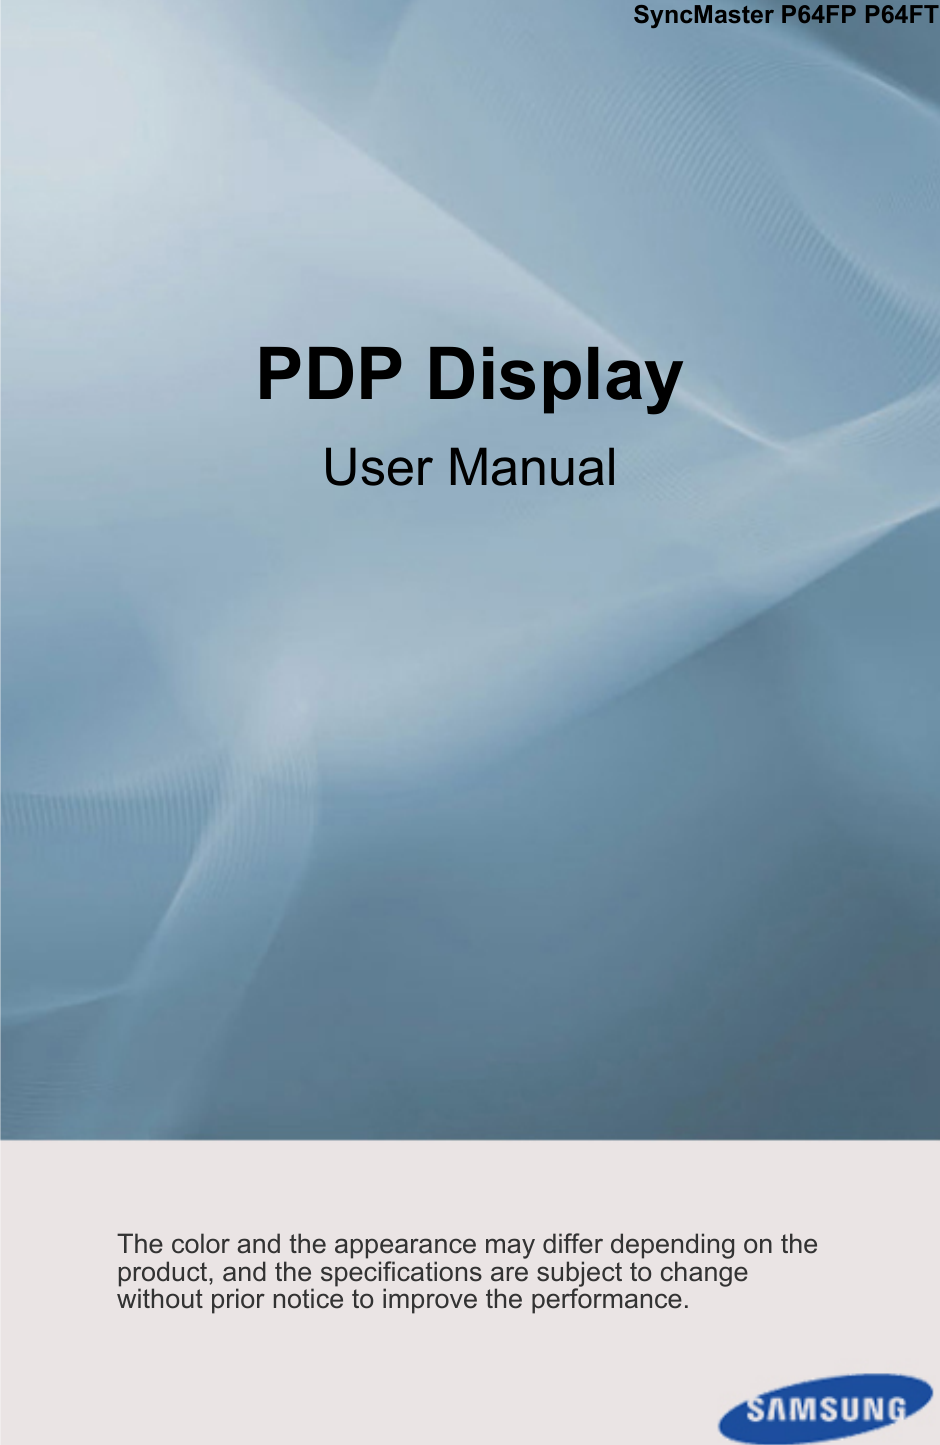 SyncMaster P64FP P64FTPDP DisplayUser ManualThe color and the appearance may differ depending on the product, and the specifications are subject to change without prior notice to improve the performance.